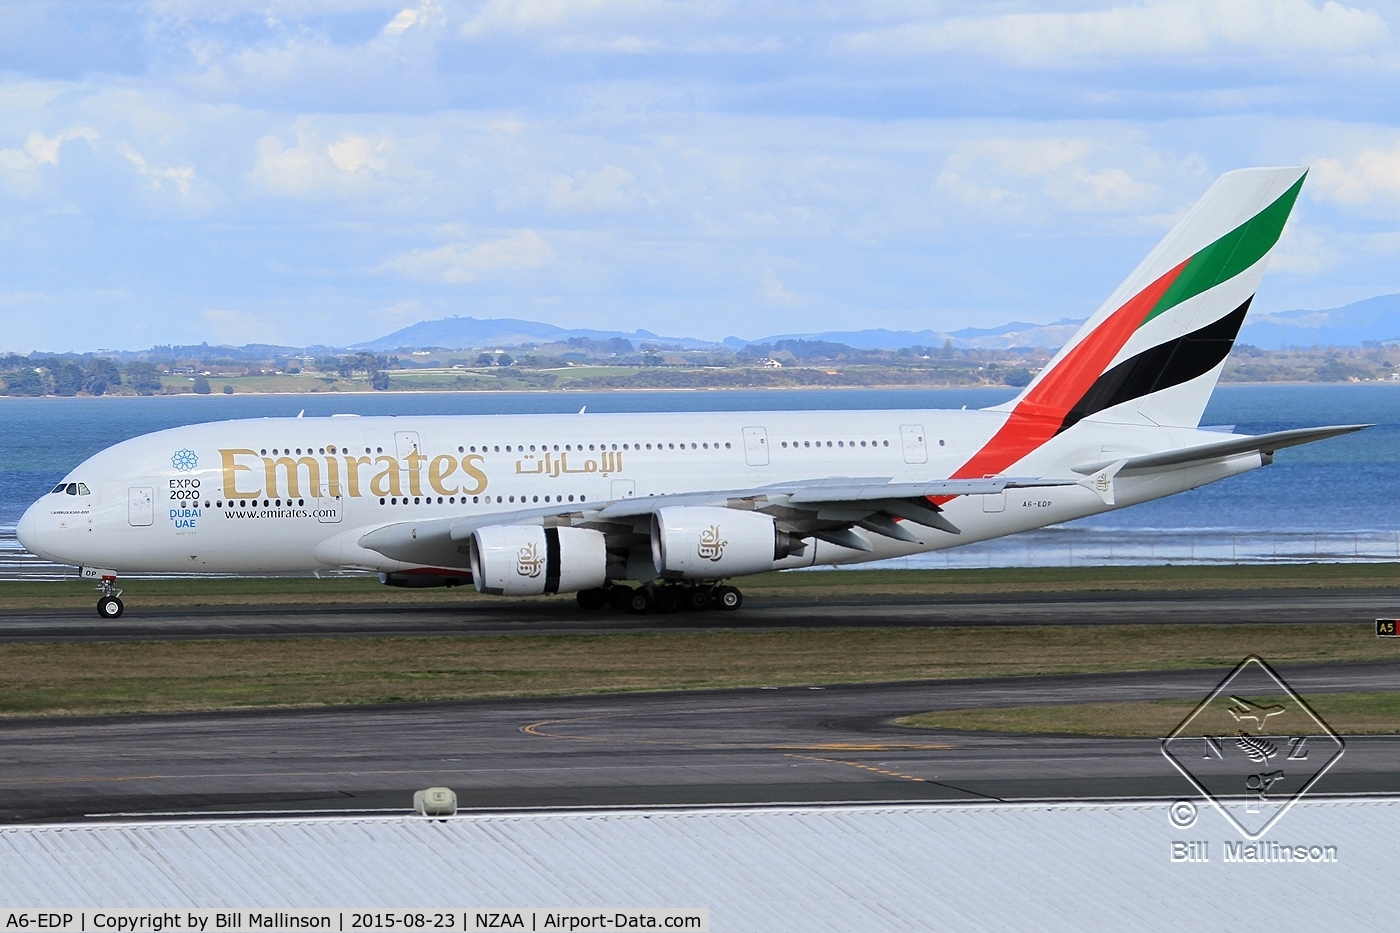 A6-EDP, 2011 Airbus A380-861 C/N 077, in from BNE